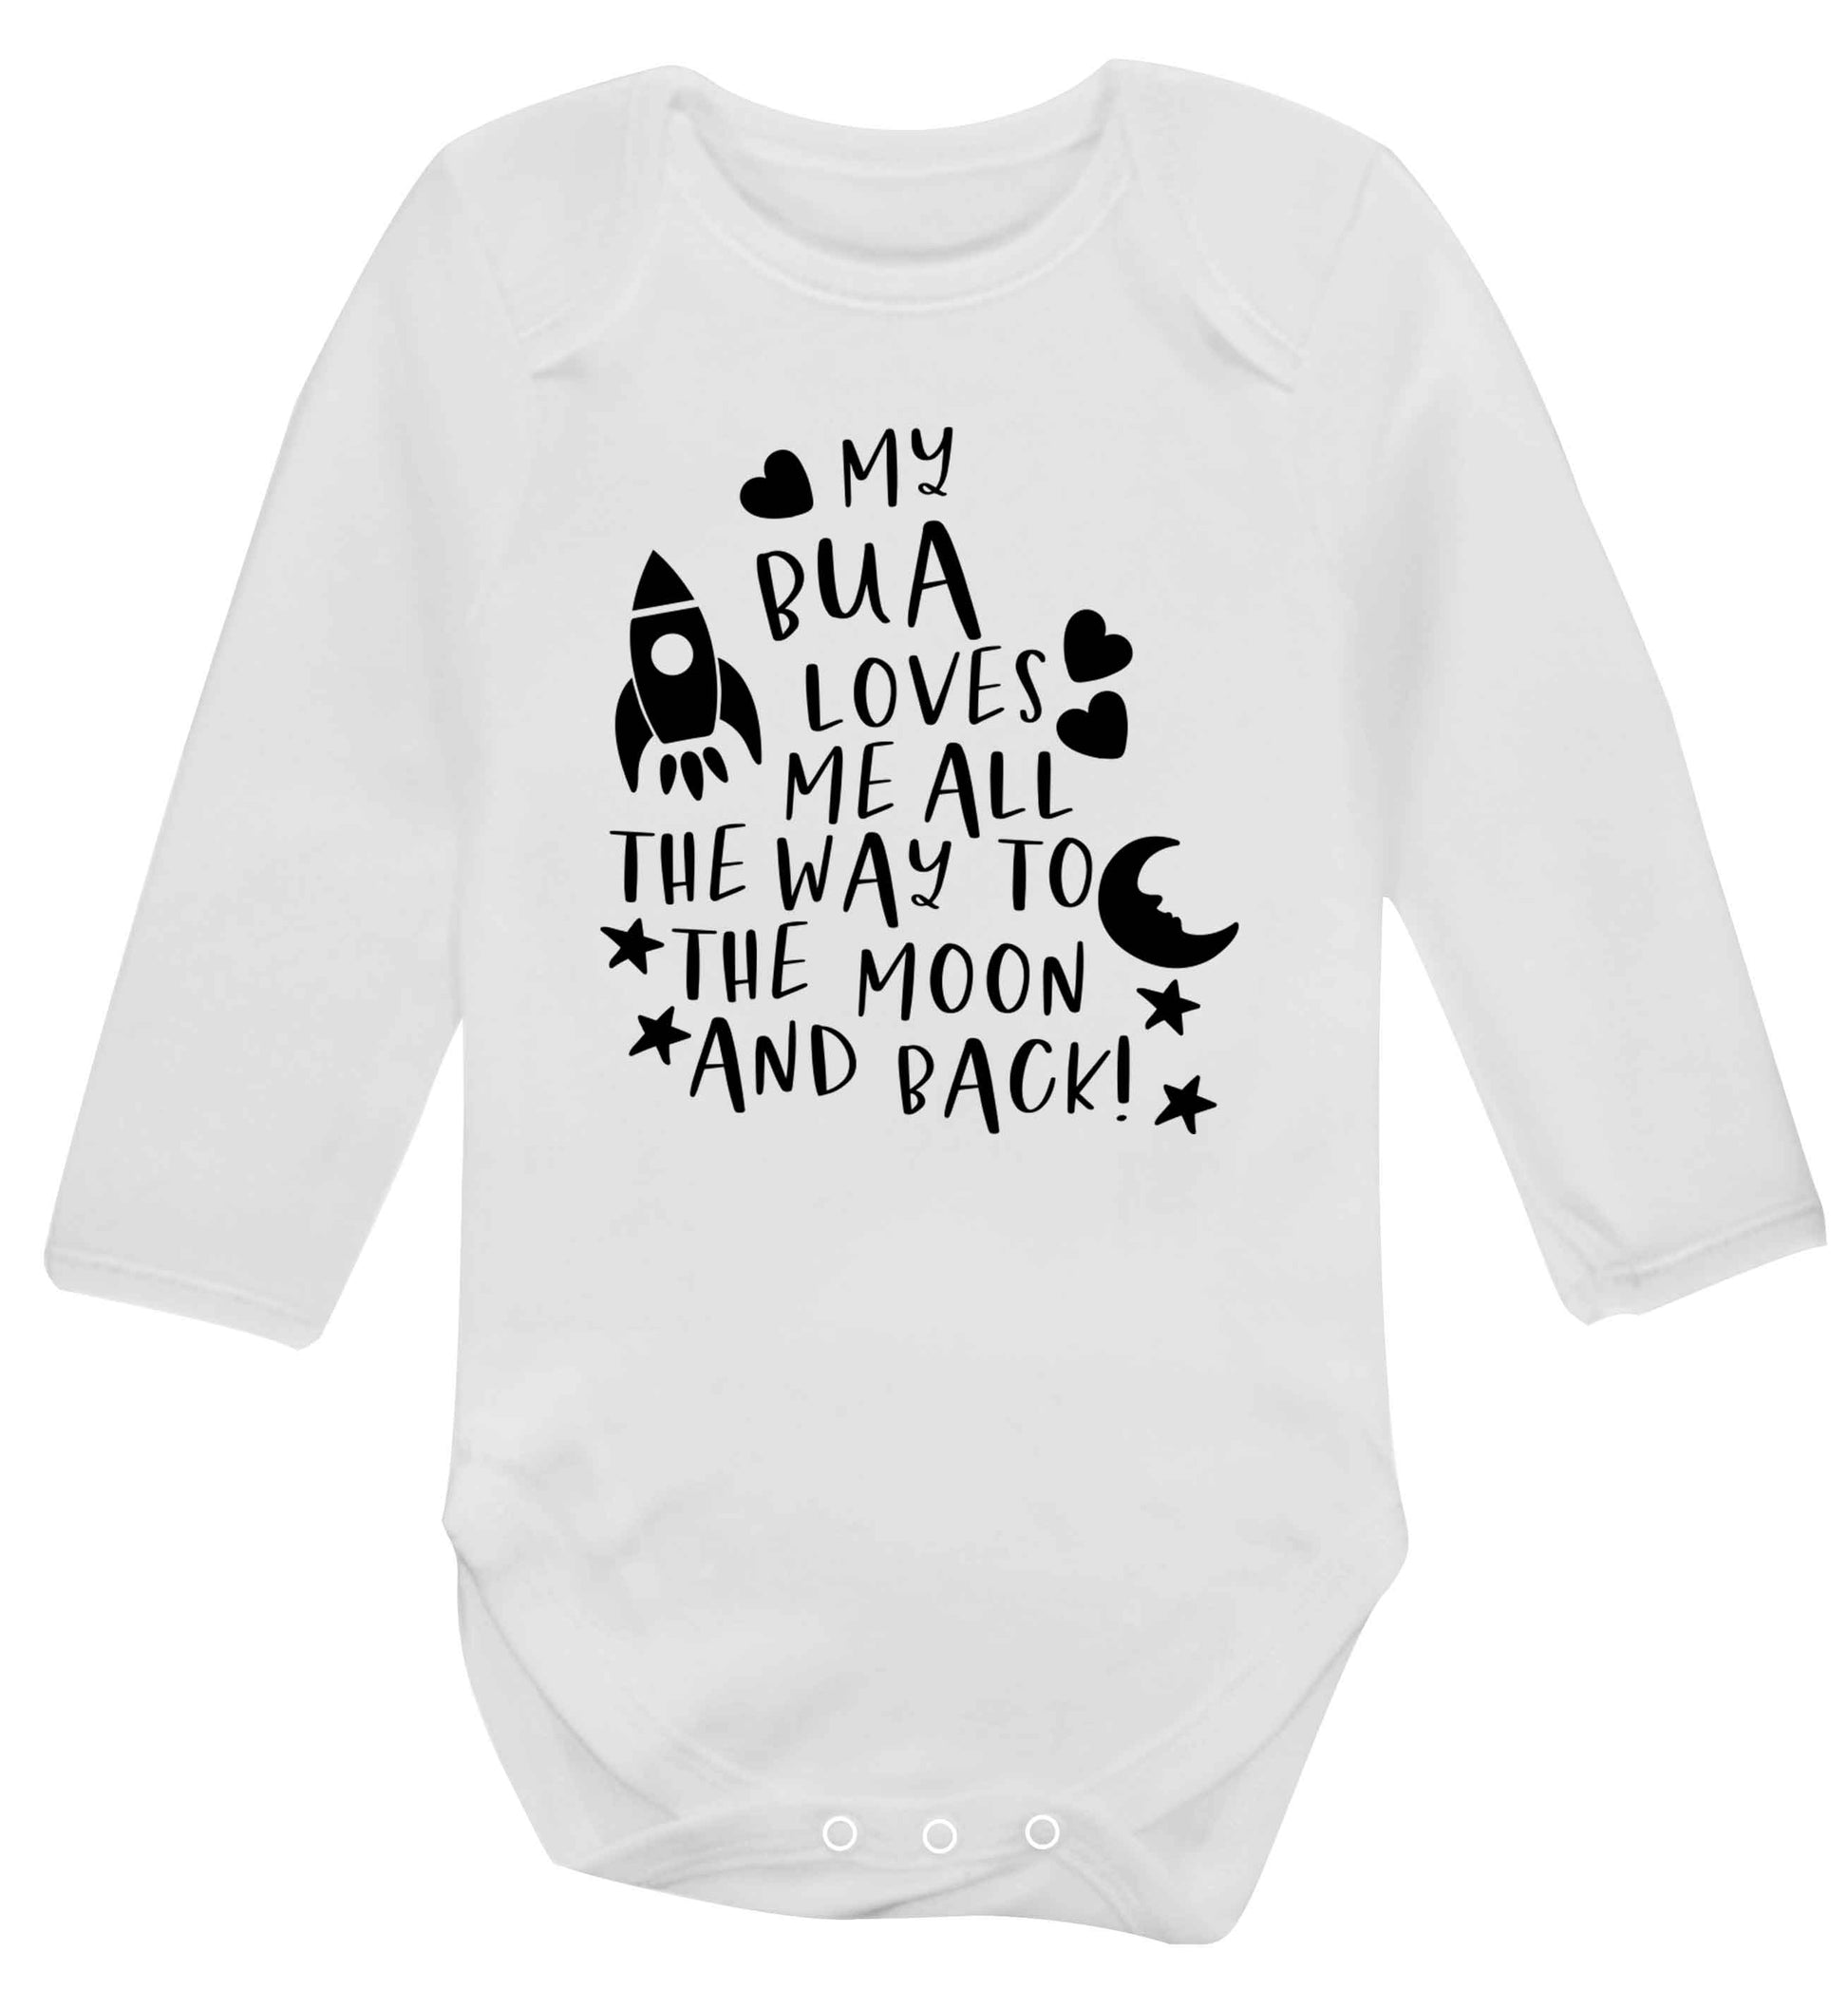 My bua loves me all they way to the moon and back Baby Vest long sleeved white 6-12 months